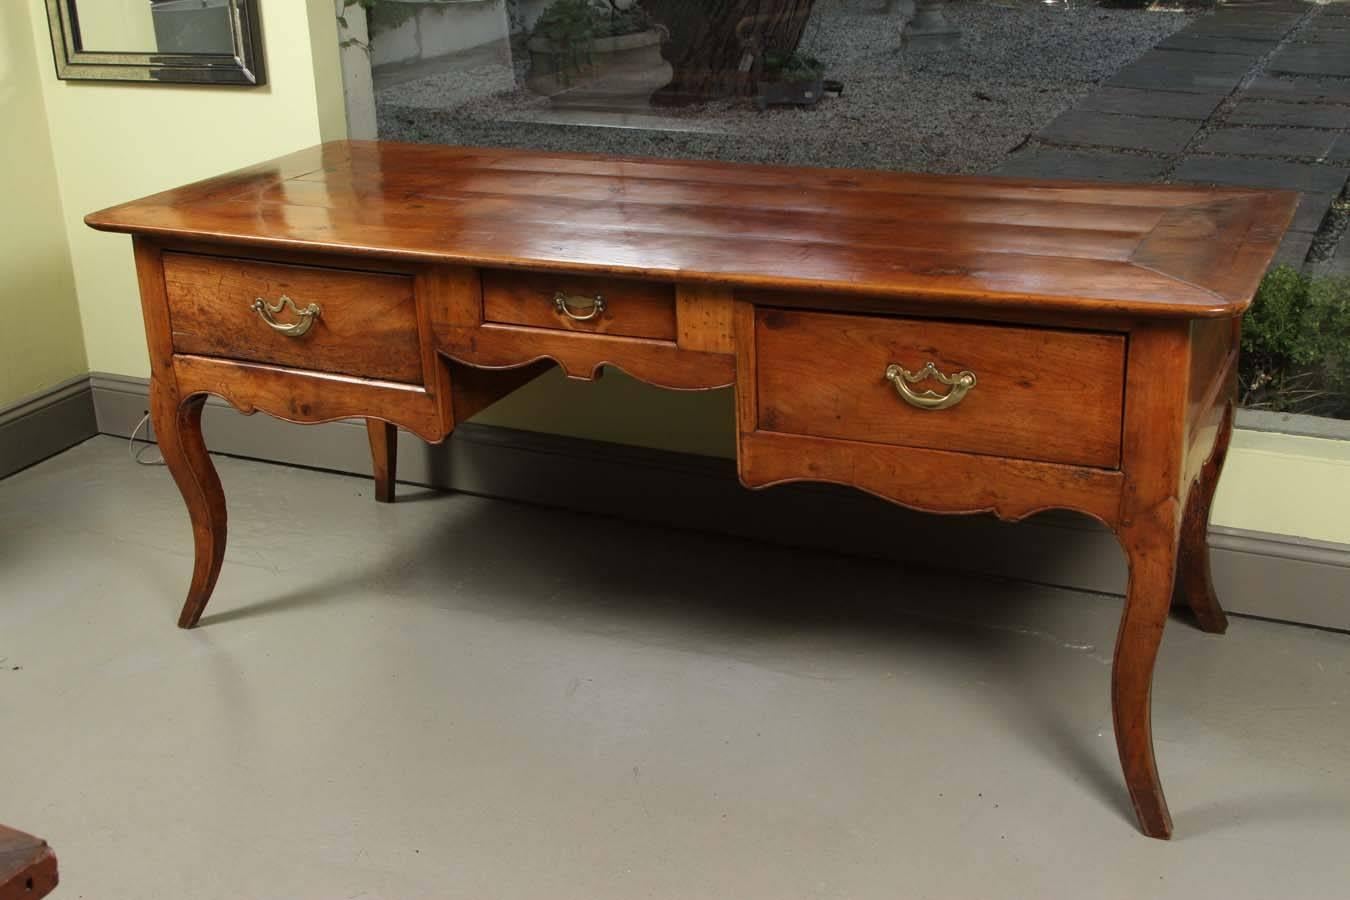 An exceptional French fruitwood writing table or desk, circa 1830. It stands on graceful curved legs and has an elegantly shaped apron. Excellent color, carving and condition.